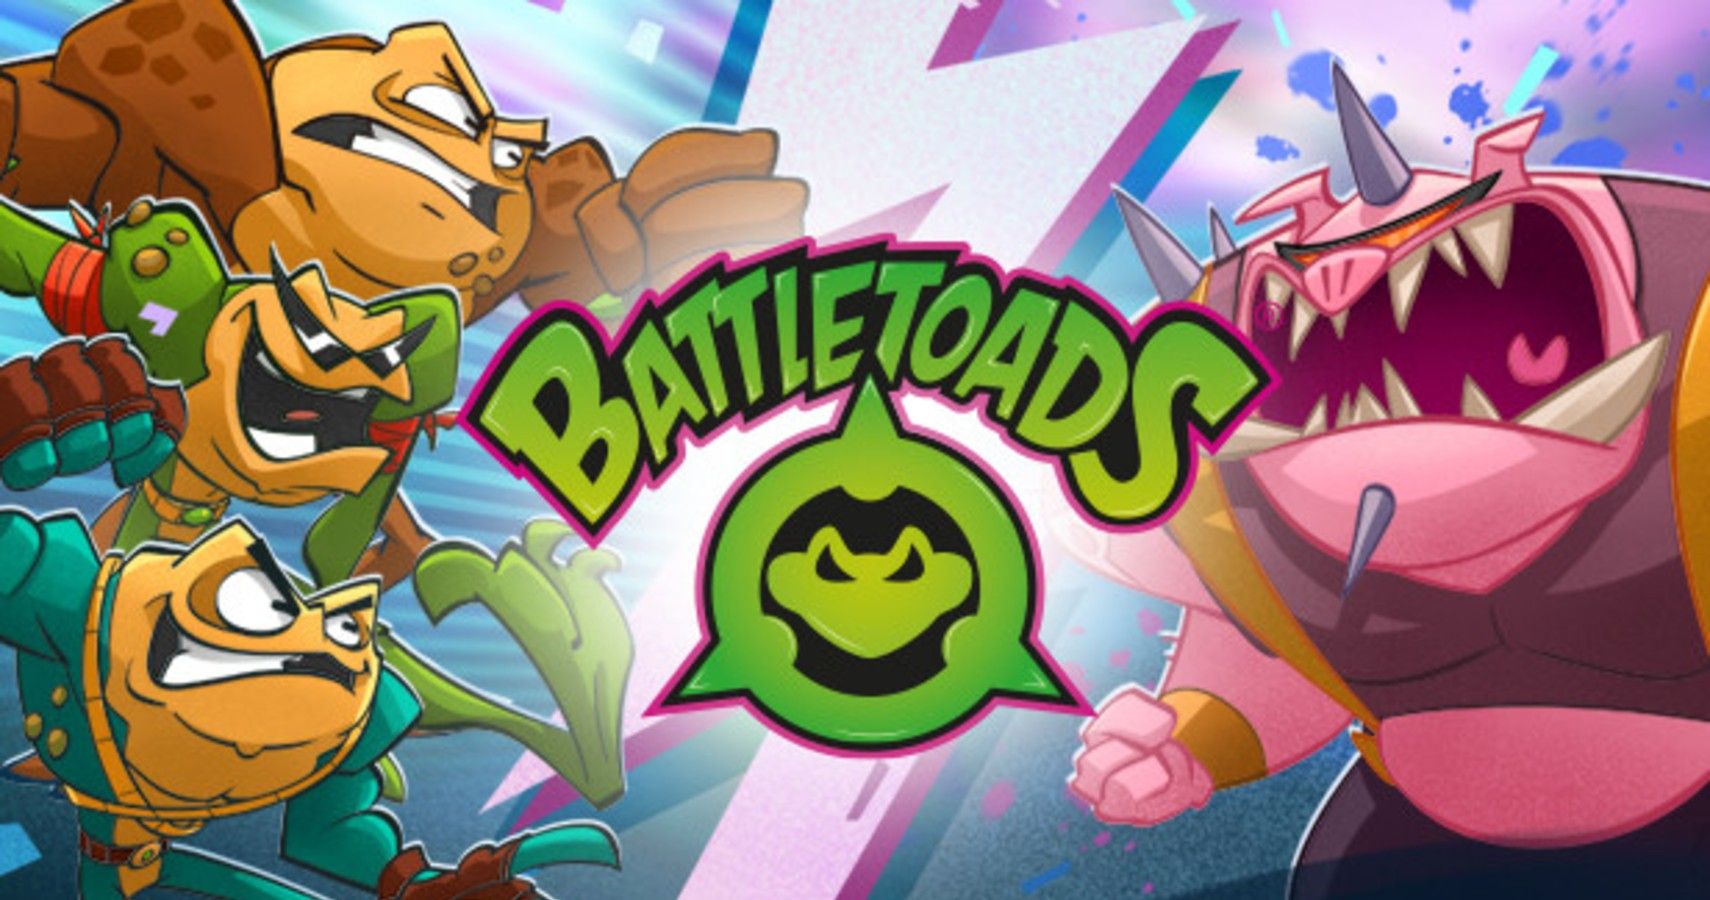 Battletoads will be release August 20th